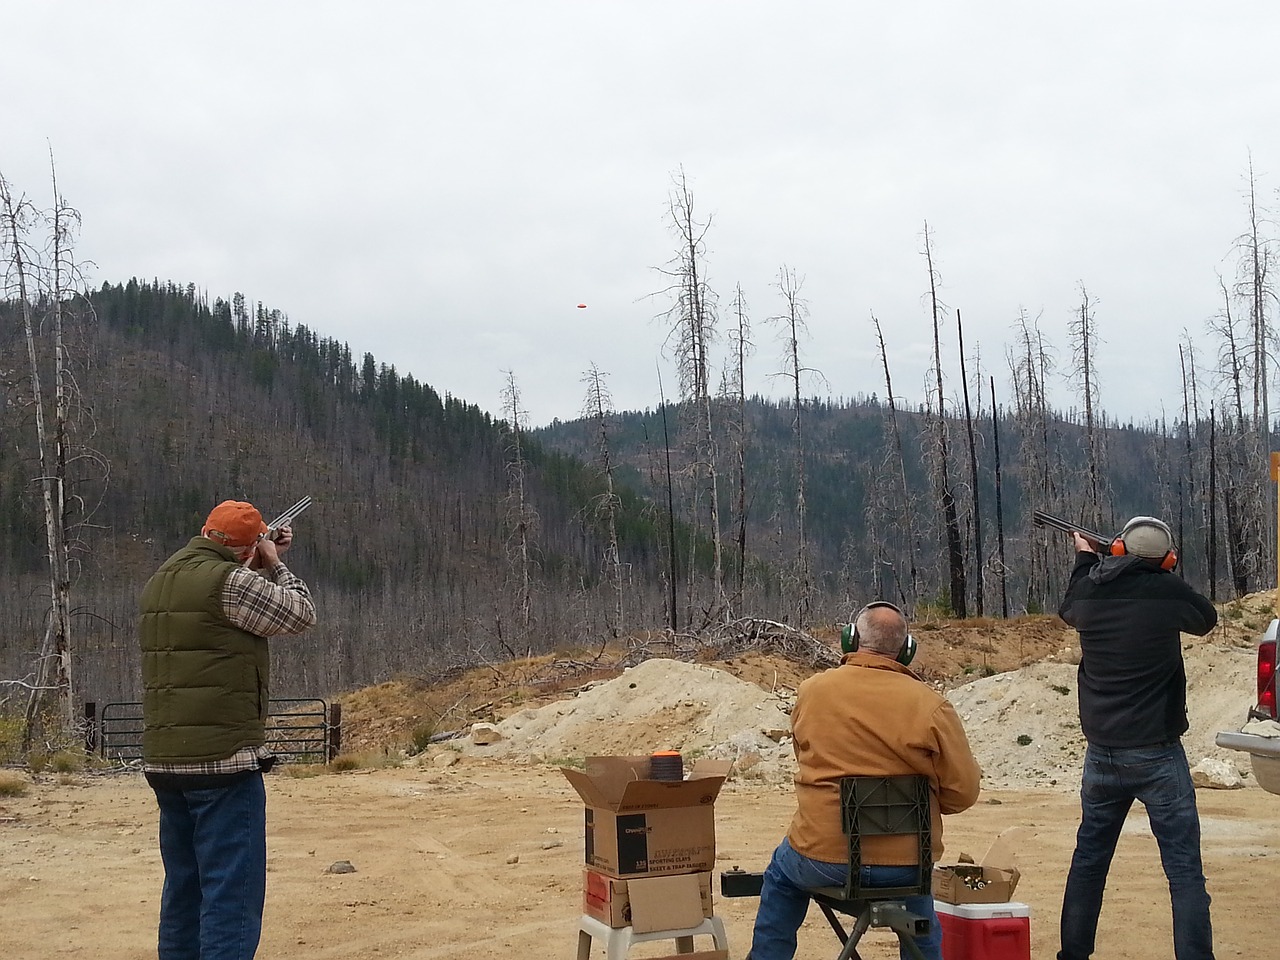 shooting clay pigeons free photo